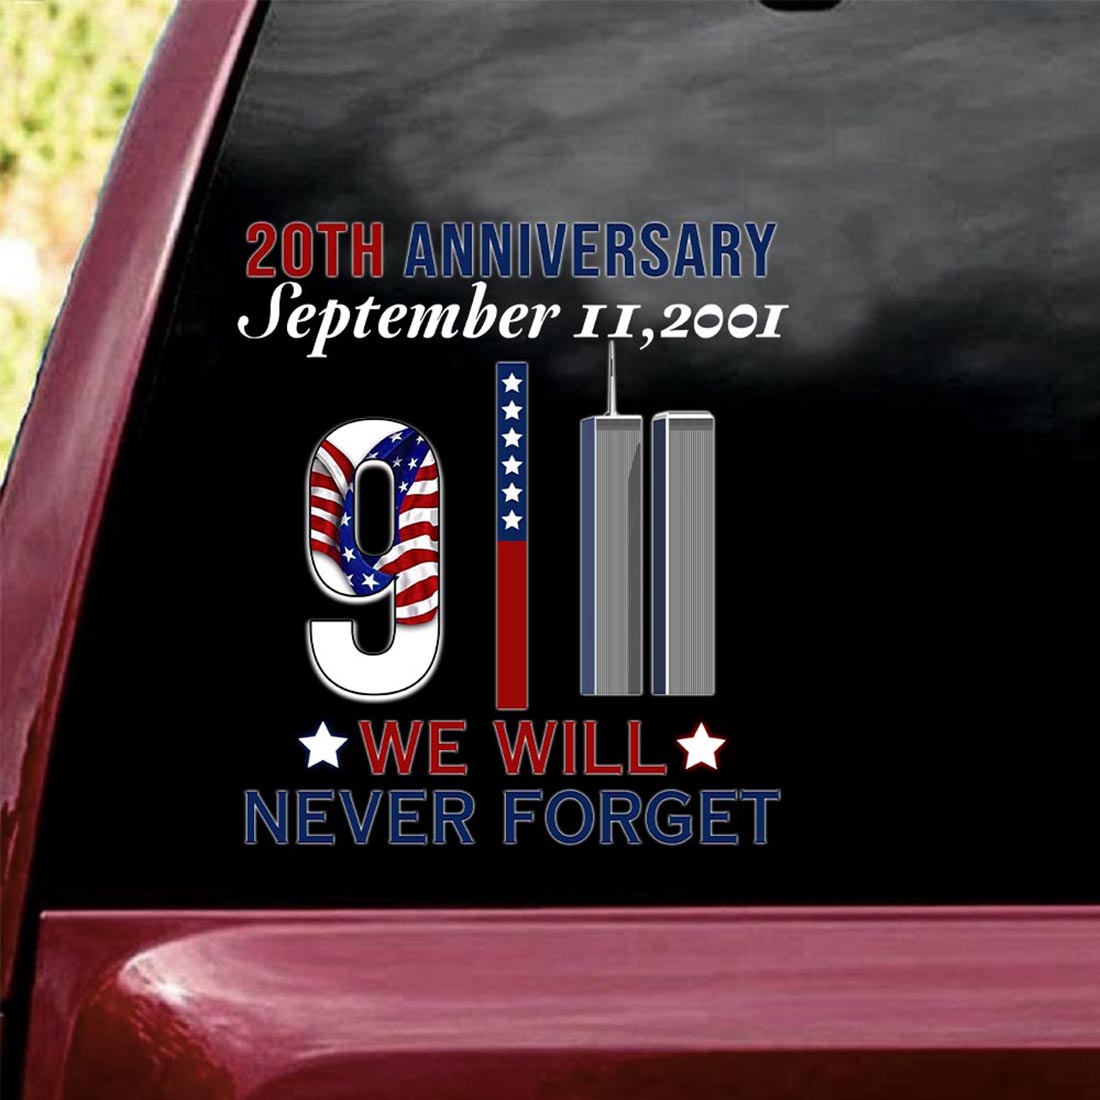 20th anniversary September 11 2001 we will never forget sticker decal